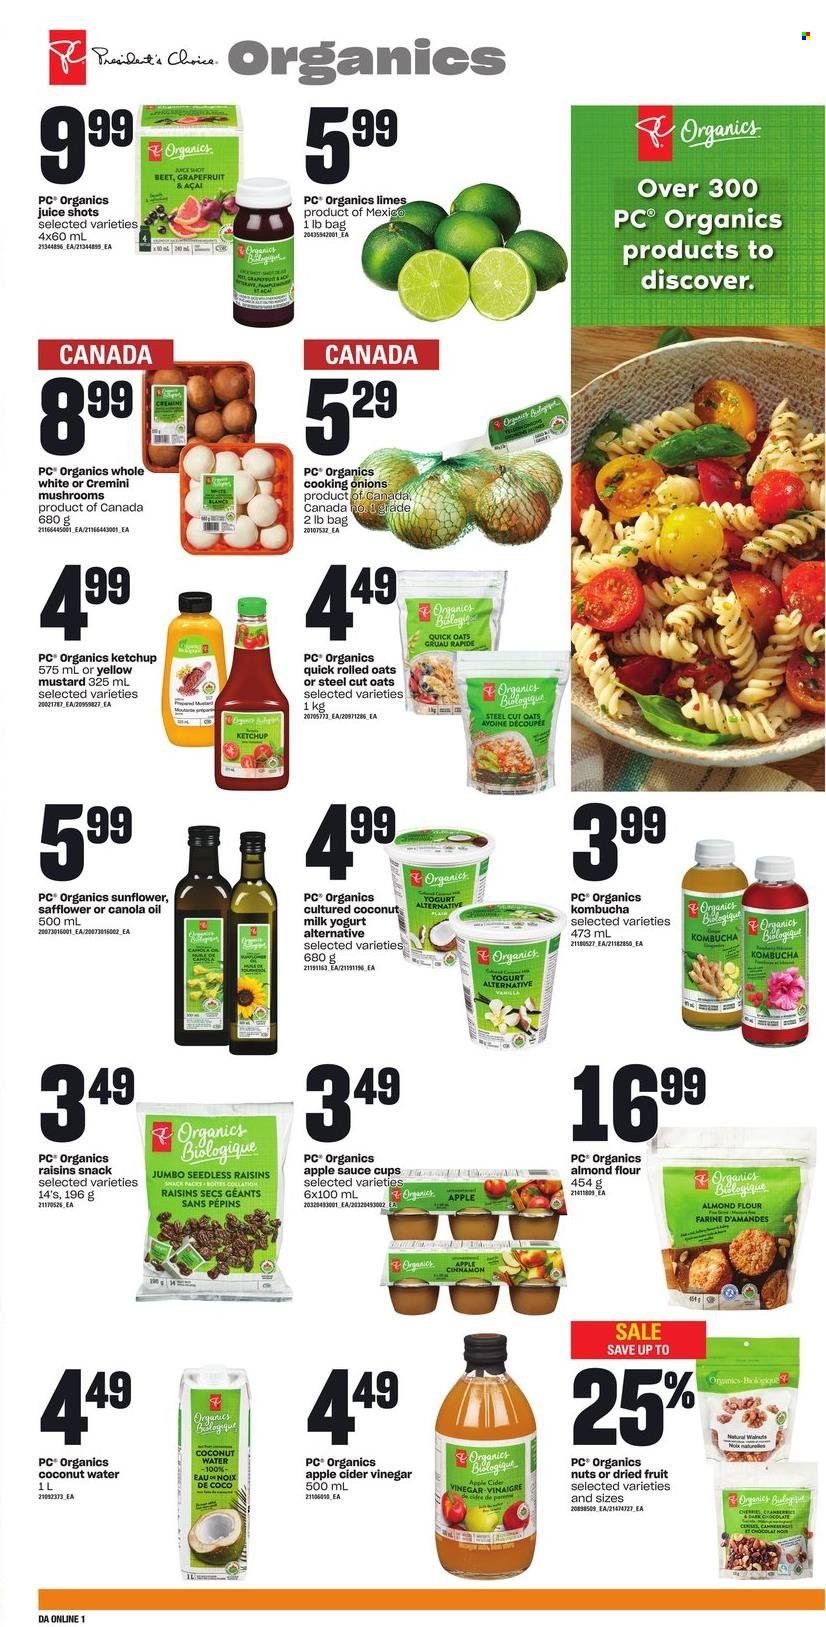 thumbnail - Dominion Flyer - March 16, 2023 - March 22, 2023 - Sales products - mushrooms, onion, grapefruits, limes, sauce, yoghurt, chocolate, snack, dark chocolate, flour, oats, almond flour, coconut milk, rolled oats, Quick Oats, cinnamon, mustard, apple cider vinegar, canola oil, vinegar, oil, apple sauce, walnuts, dried fruit, juice, coconut water, water, kombucha, Grant's, cup, sauce cup, sunflower, raisins, ketchup. Page 4.